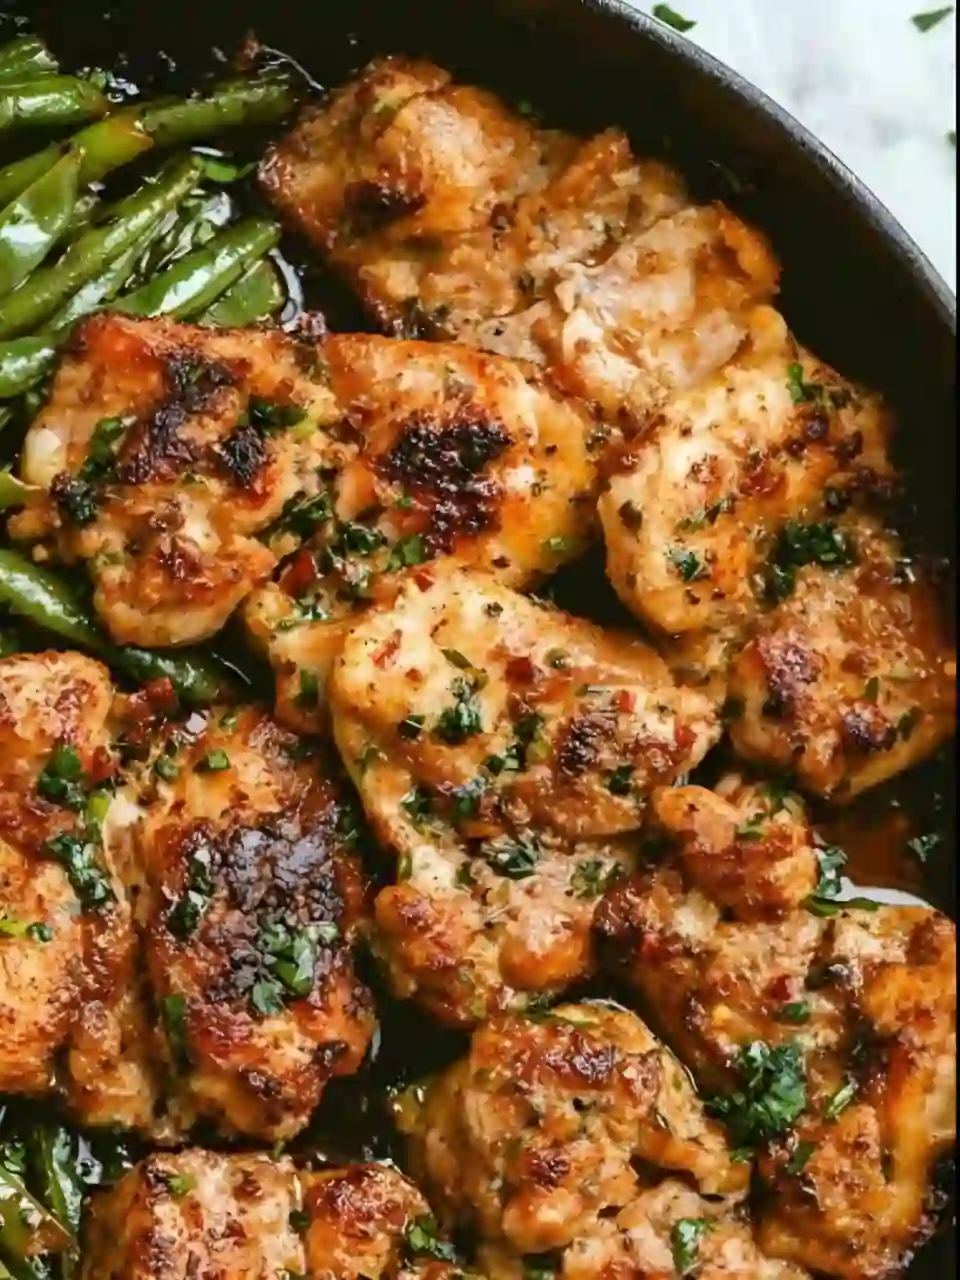 Lemon Garlic Butter Chicken and Green Beans Skillet - Balanced Nutrition with Delicious Flavors 2024!